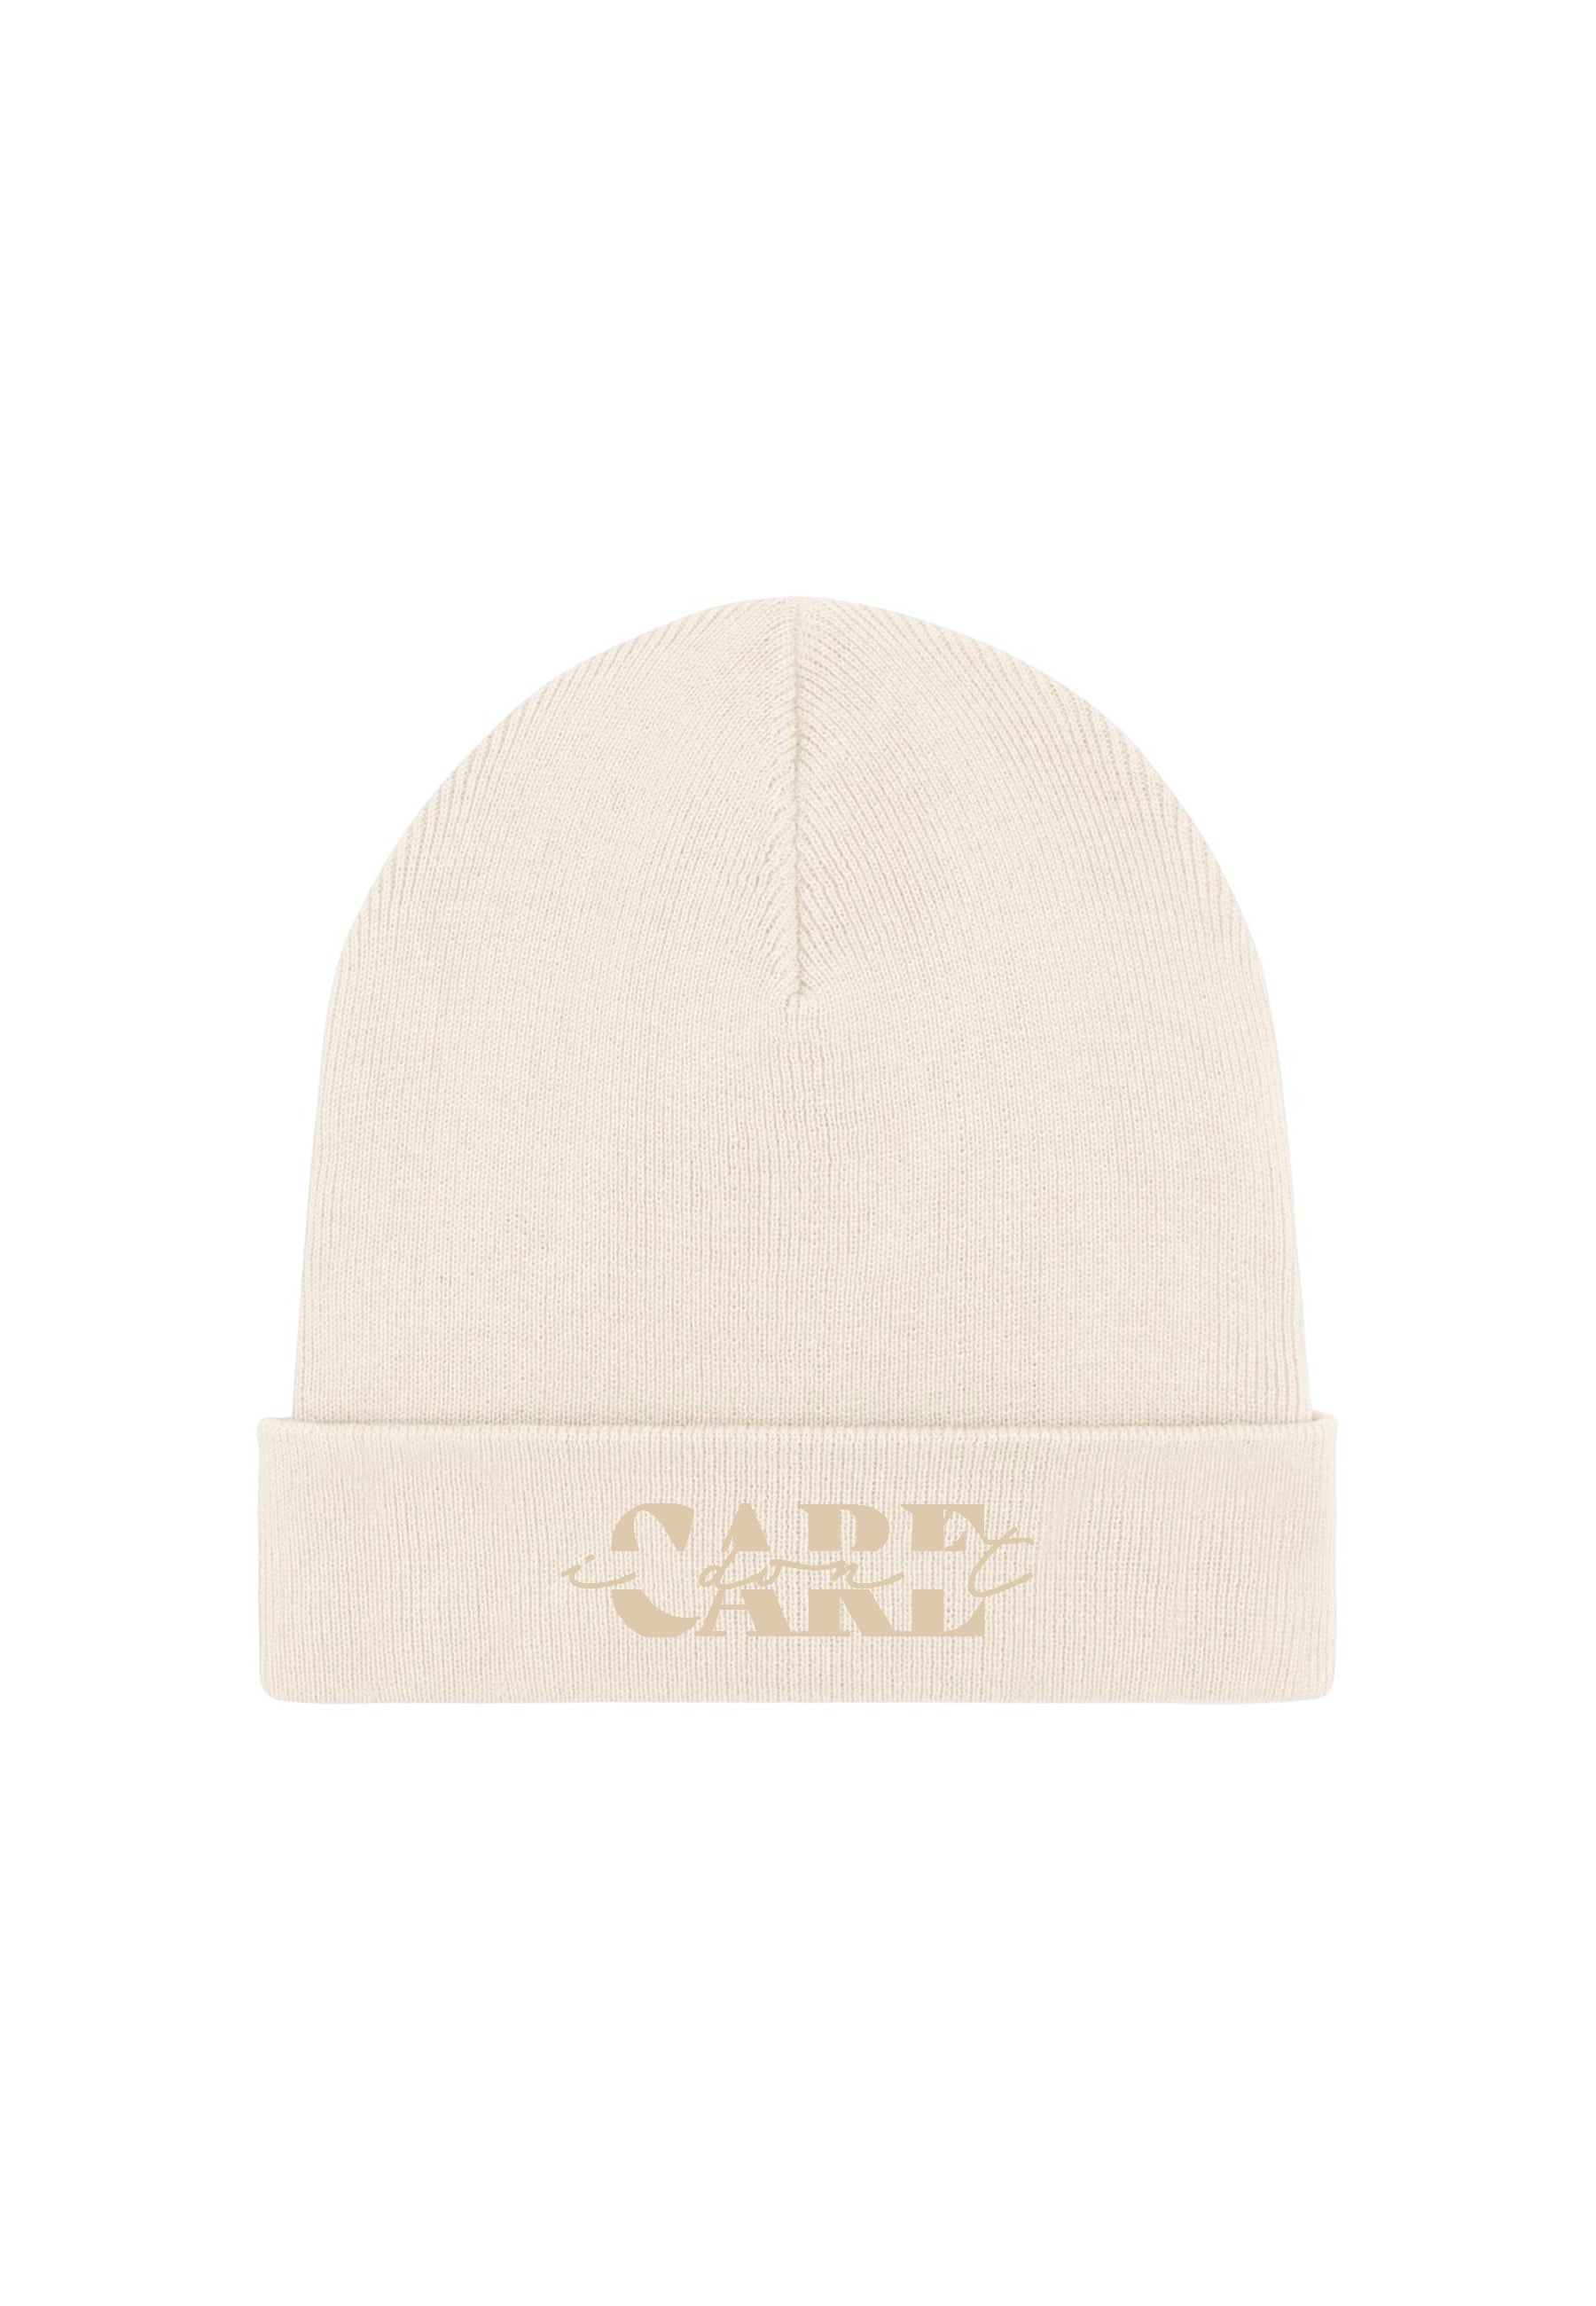 YOUR VIBE Beanie Natural